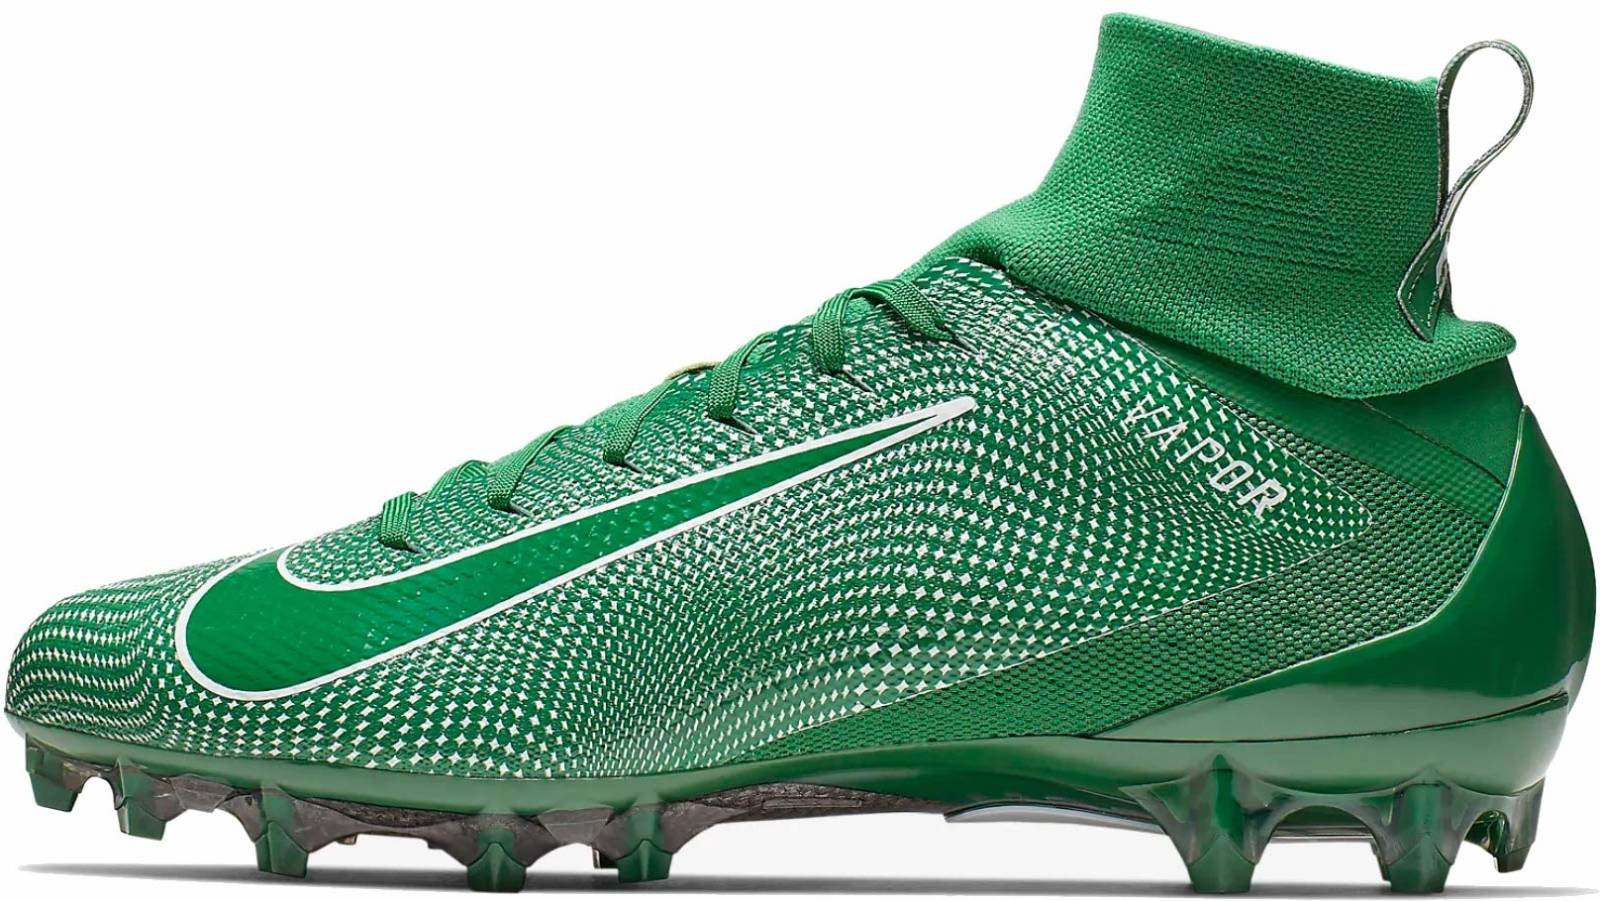 Save 35% on Green Football Cleats (5 